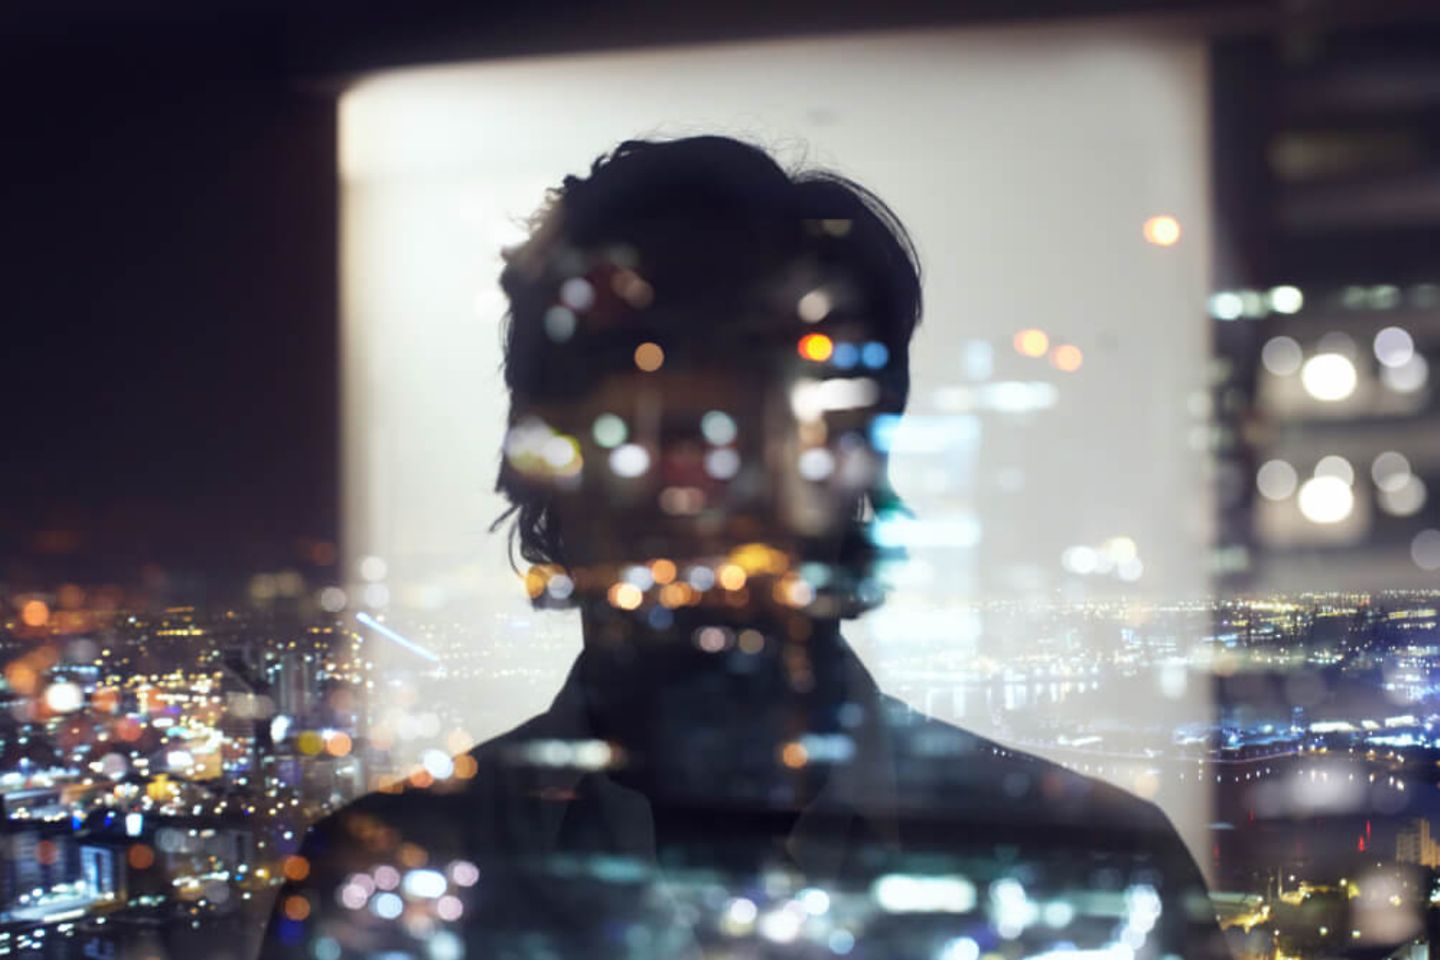 reflection of person at night with city lights